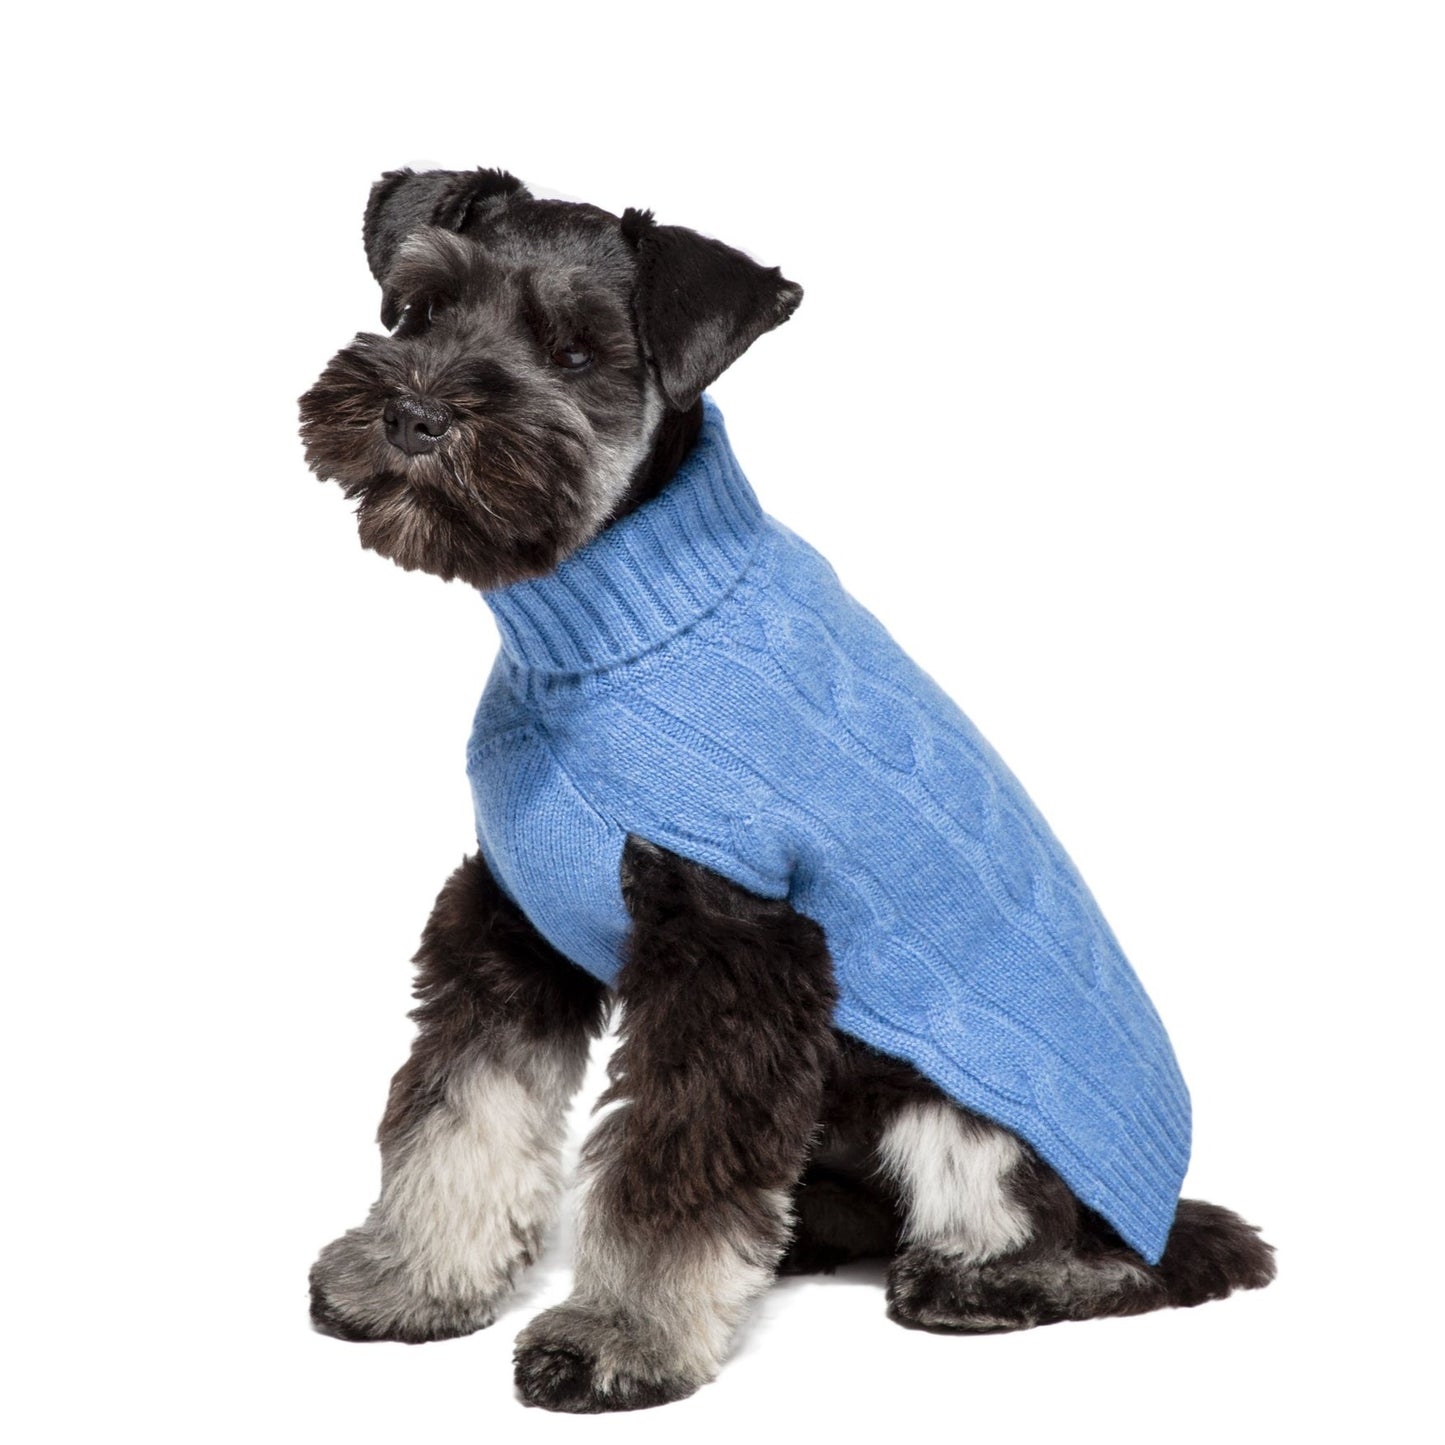 Cableknit Cashmere Dog Sweater, Blue